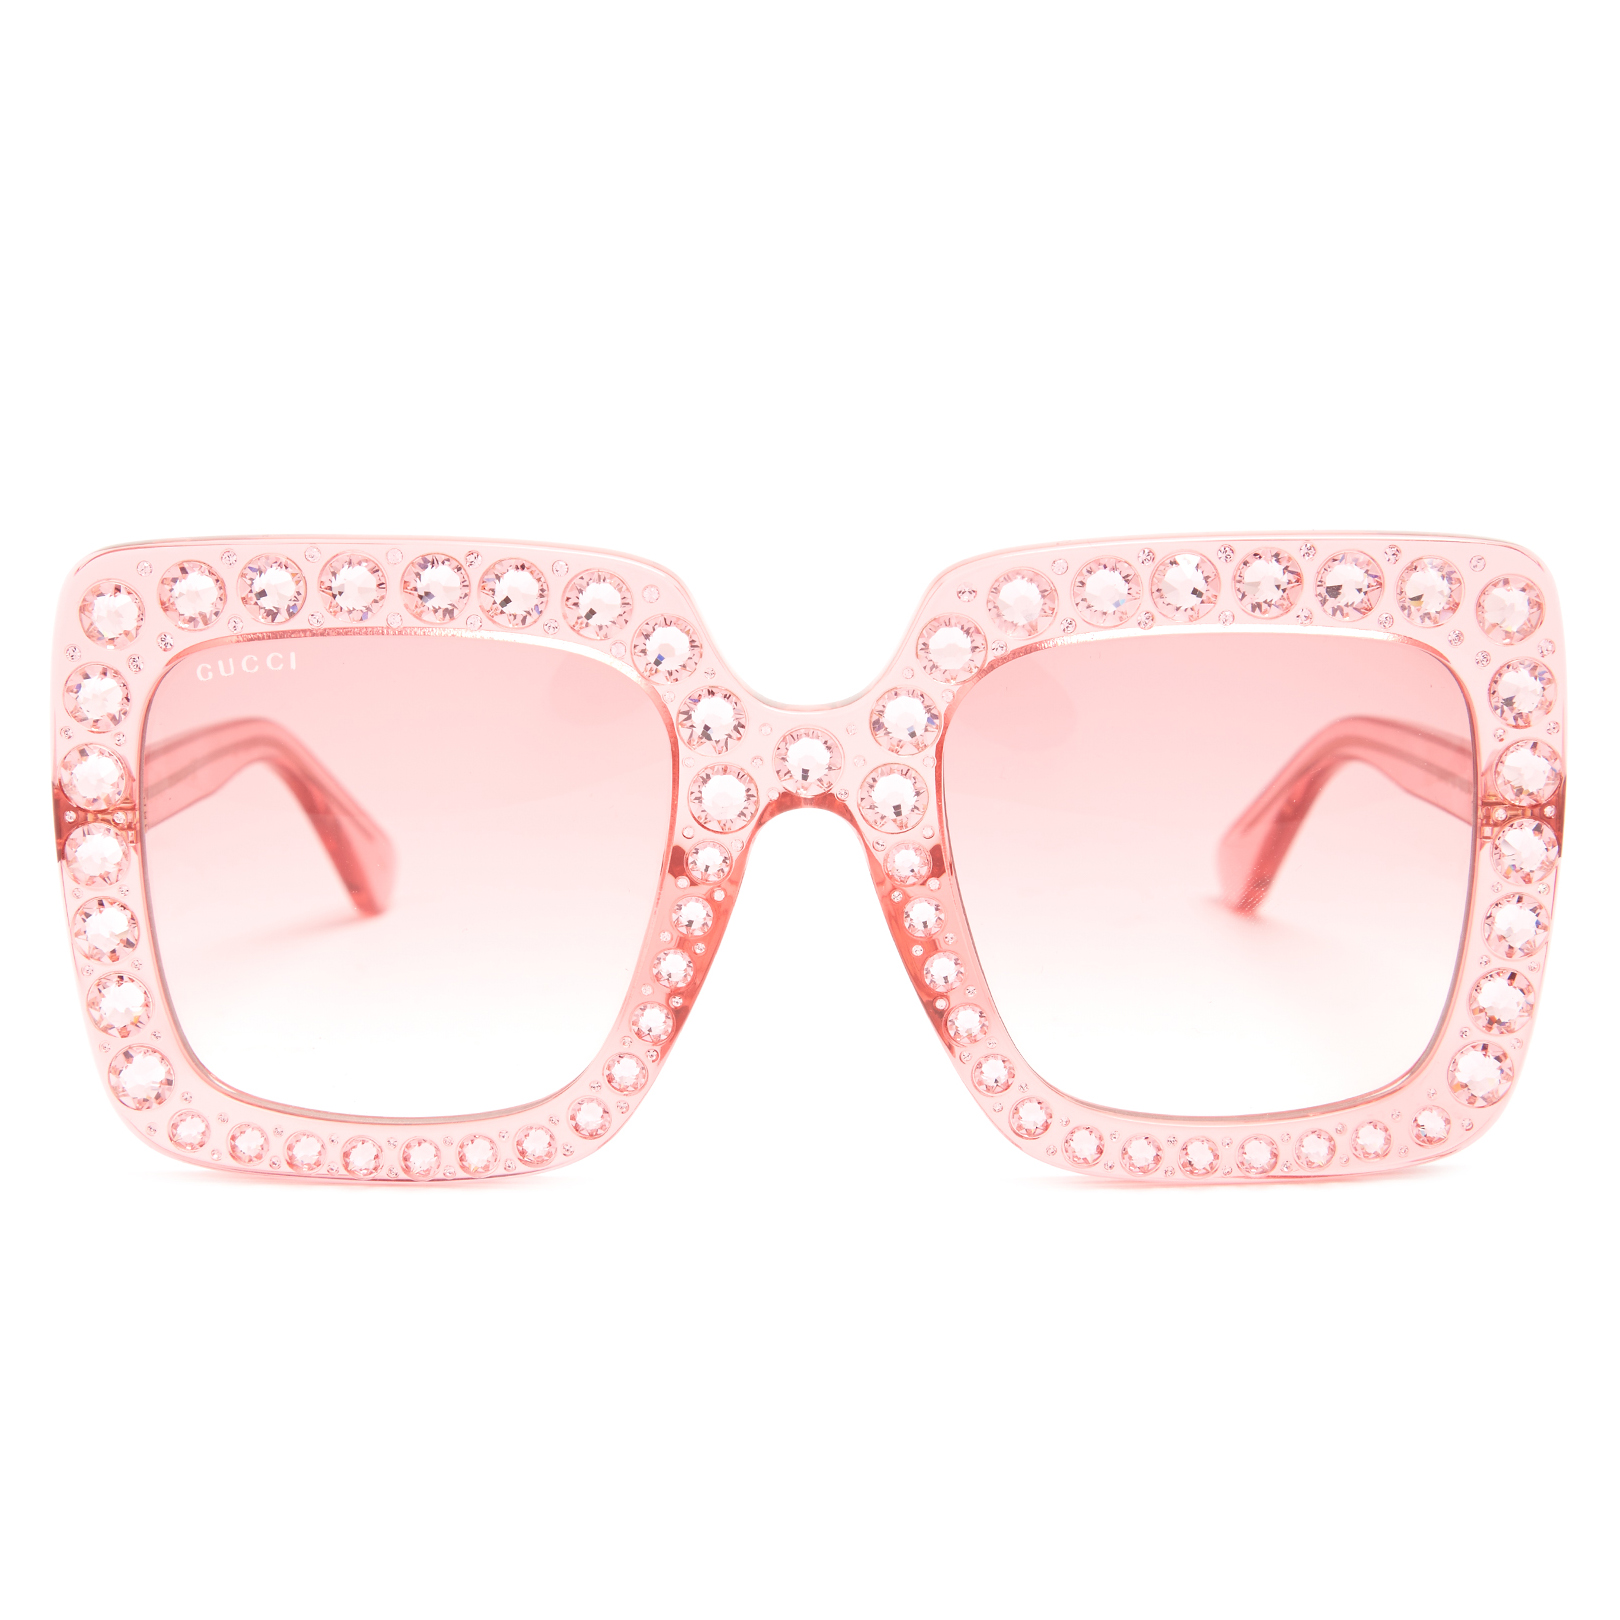 Guess Where Rihanna's Crop Over Glasses Are From? Embellished Sunglasses Gucci Buy Online